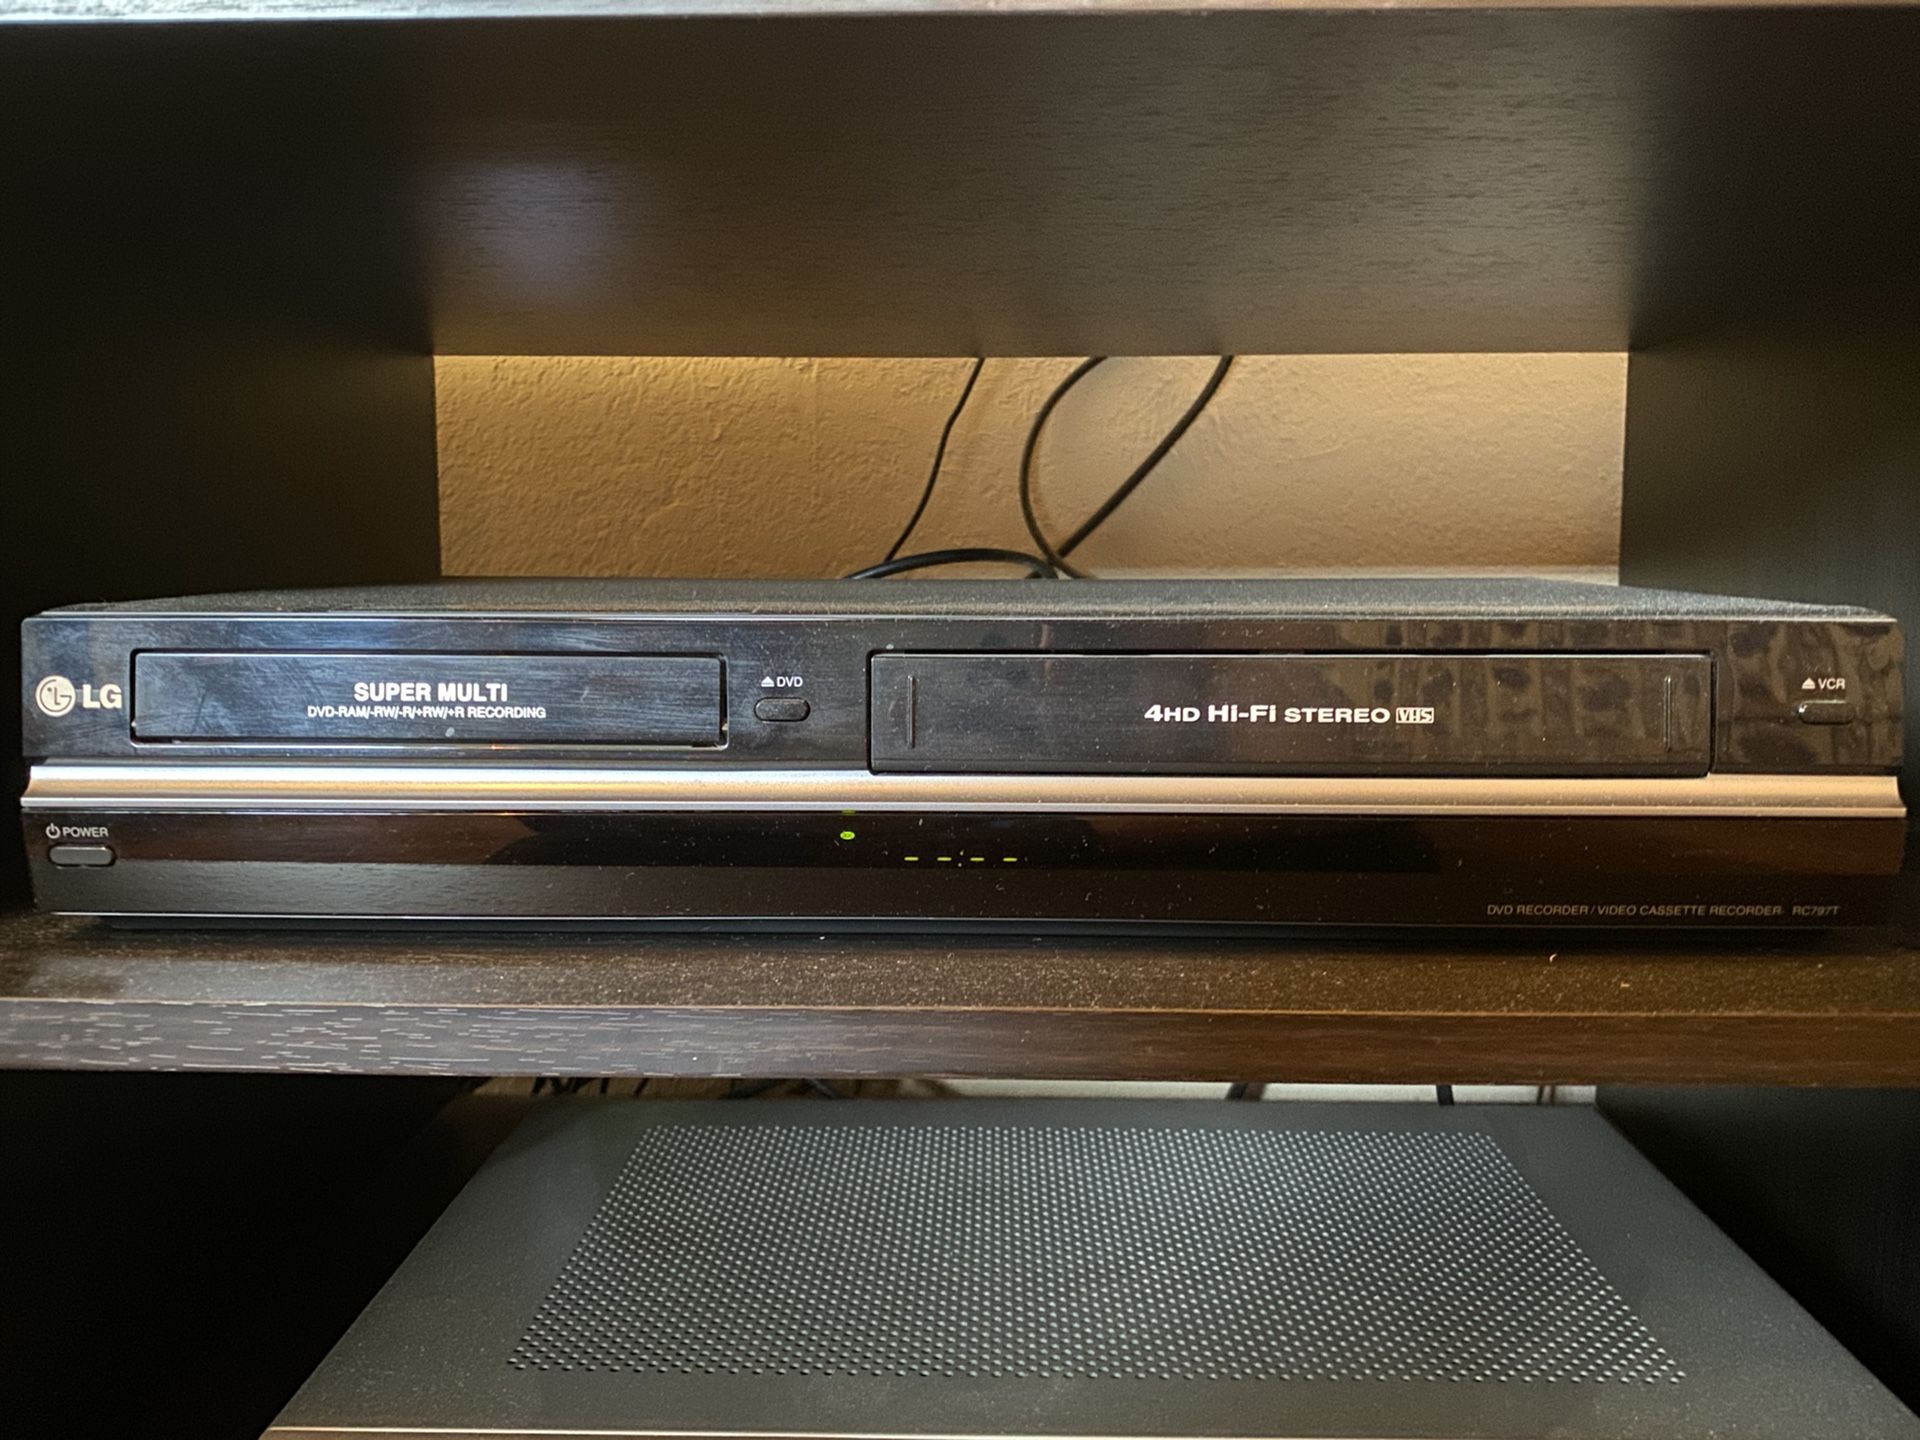 LG VHS and DVD